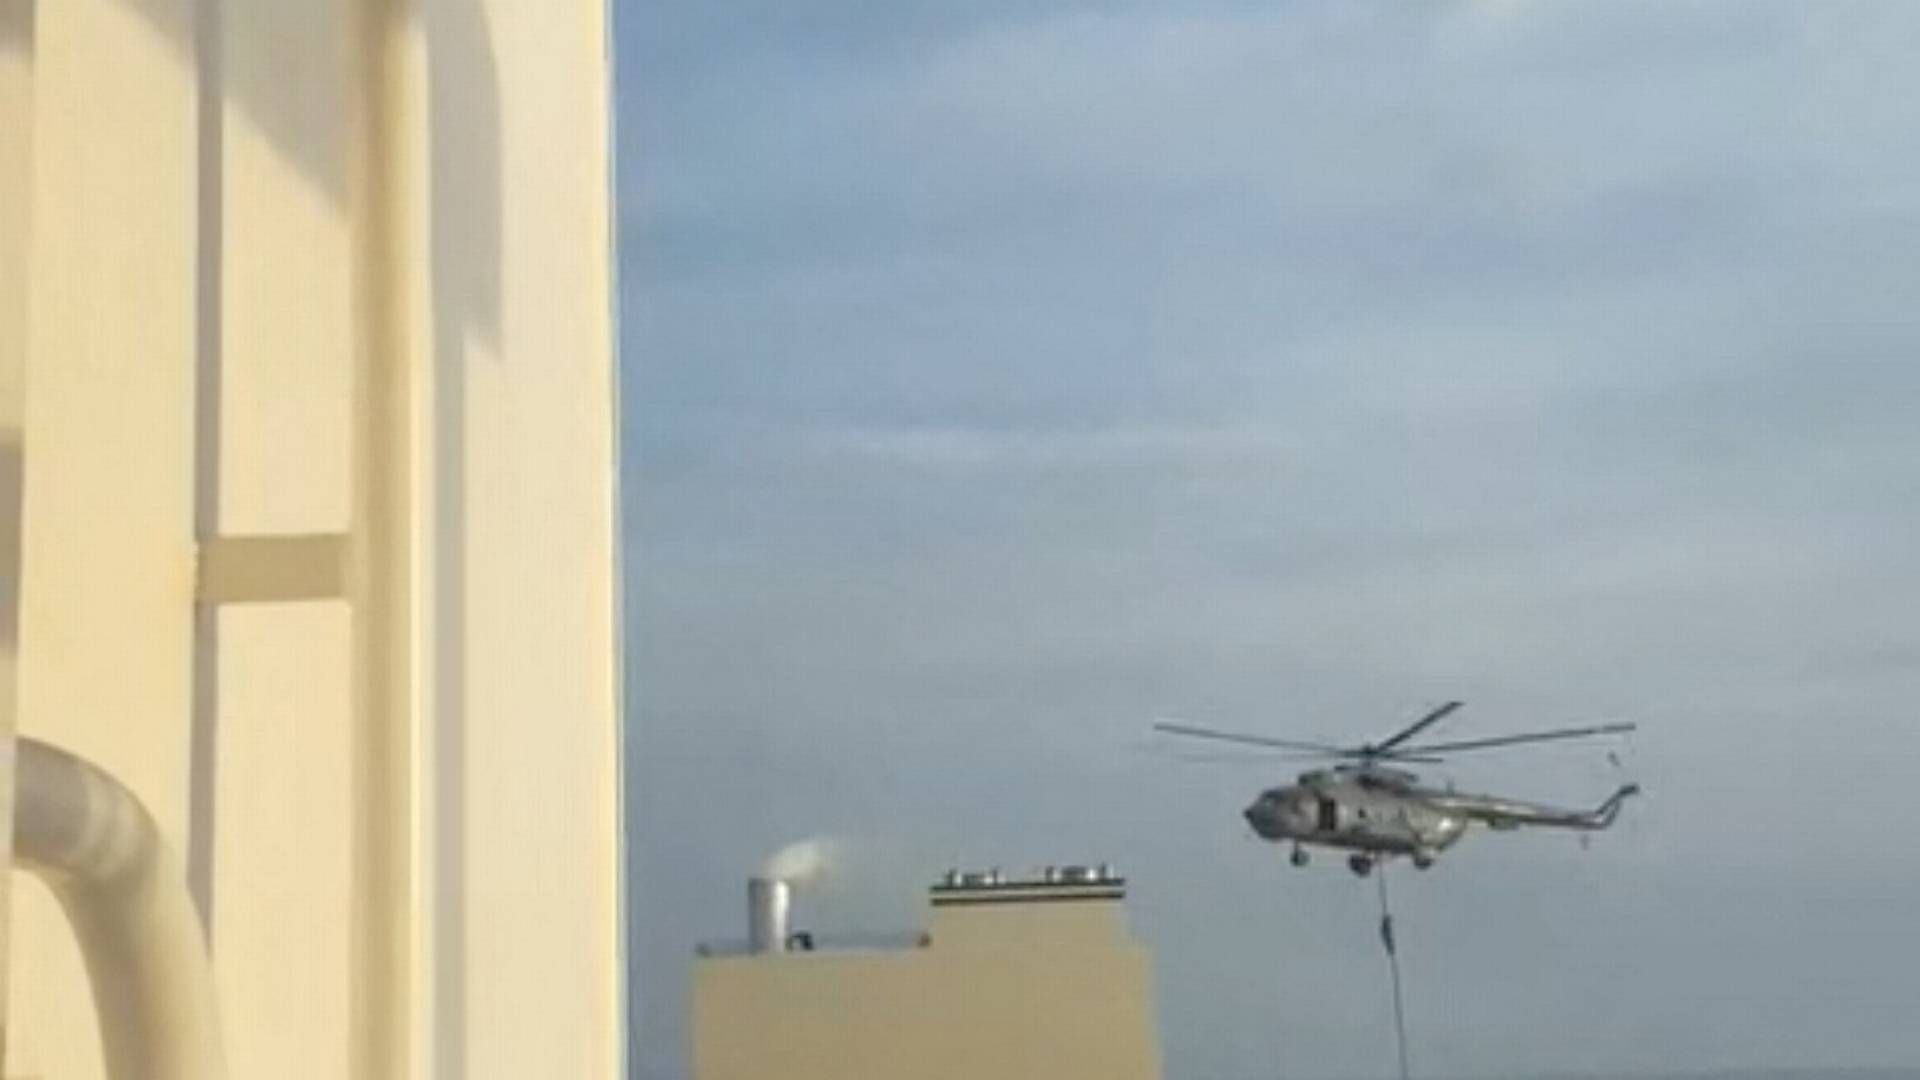 The seizure of the MSC Aries was accompanied by a helicopter from Iran's Revolutionary Guard Special Forces. | Photo: Video Obtained By Reuters/Reuters/Ritzau Scanpix